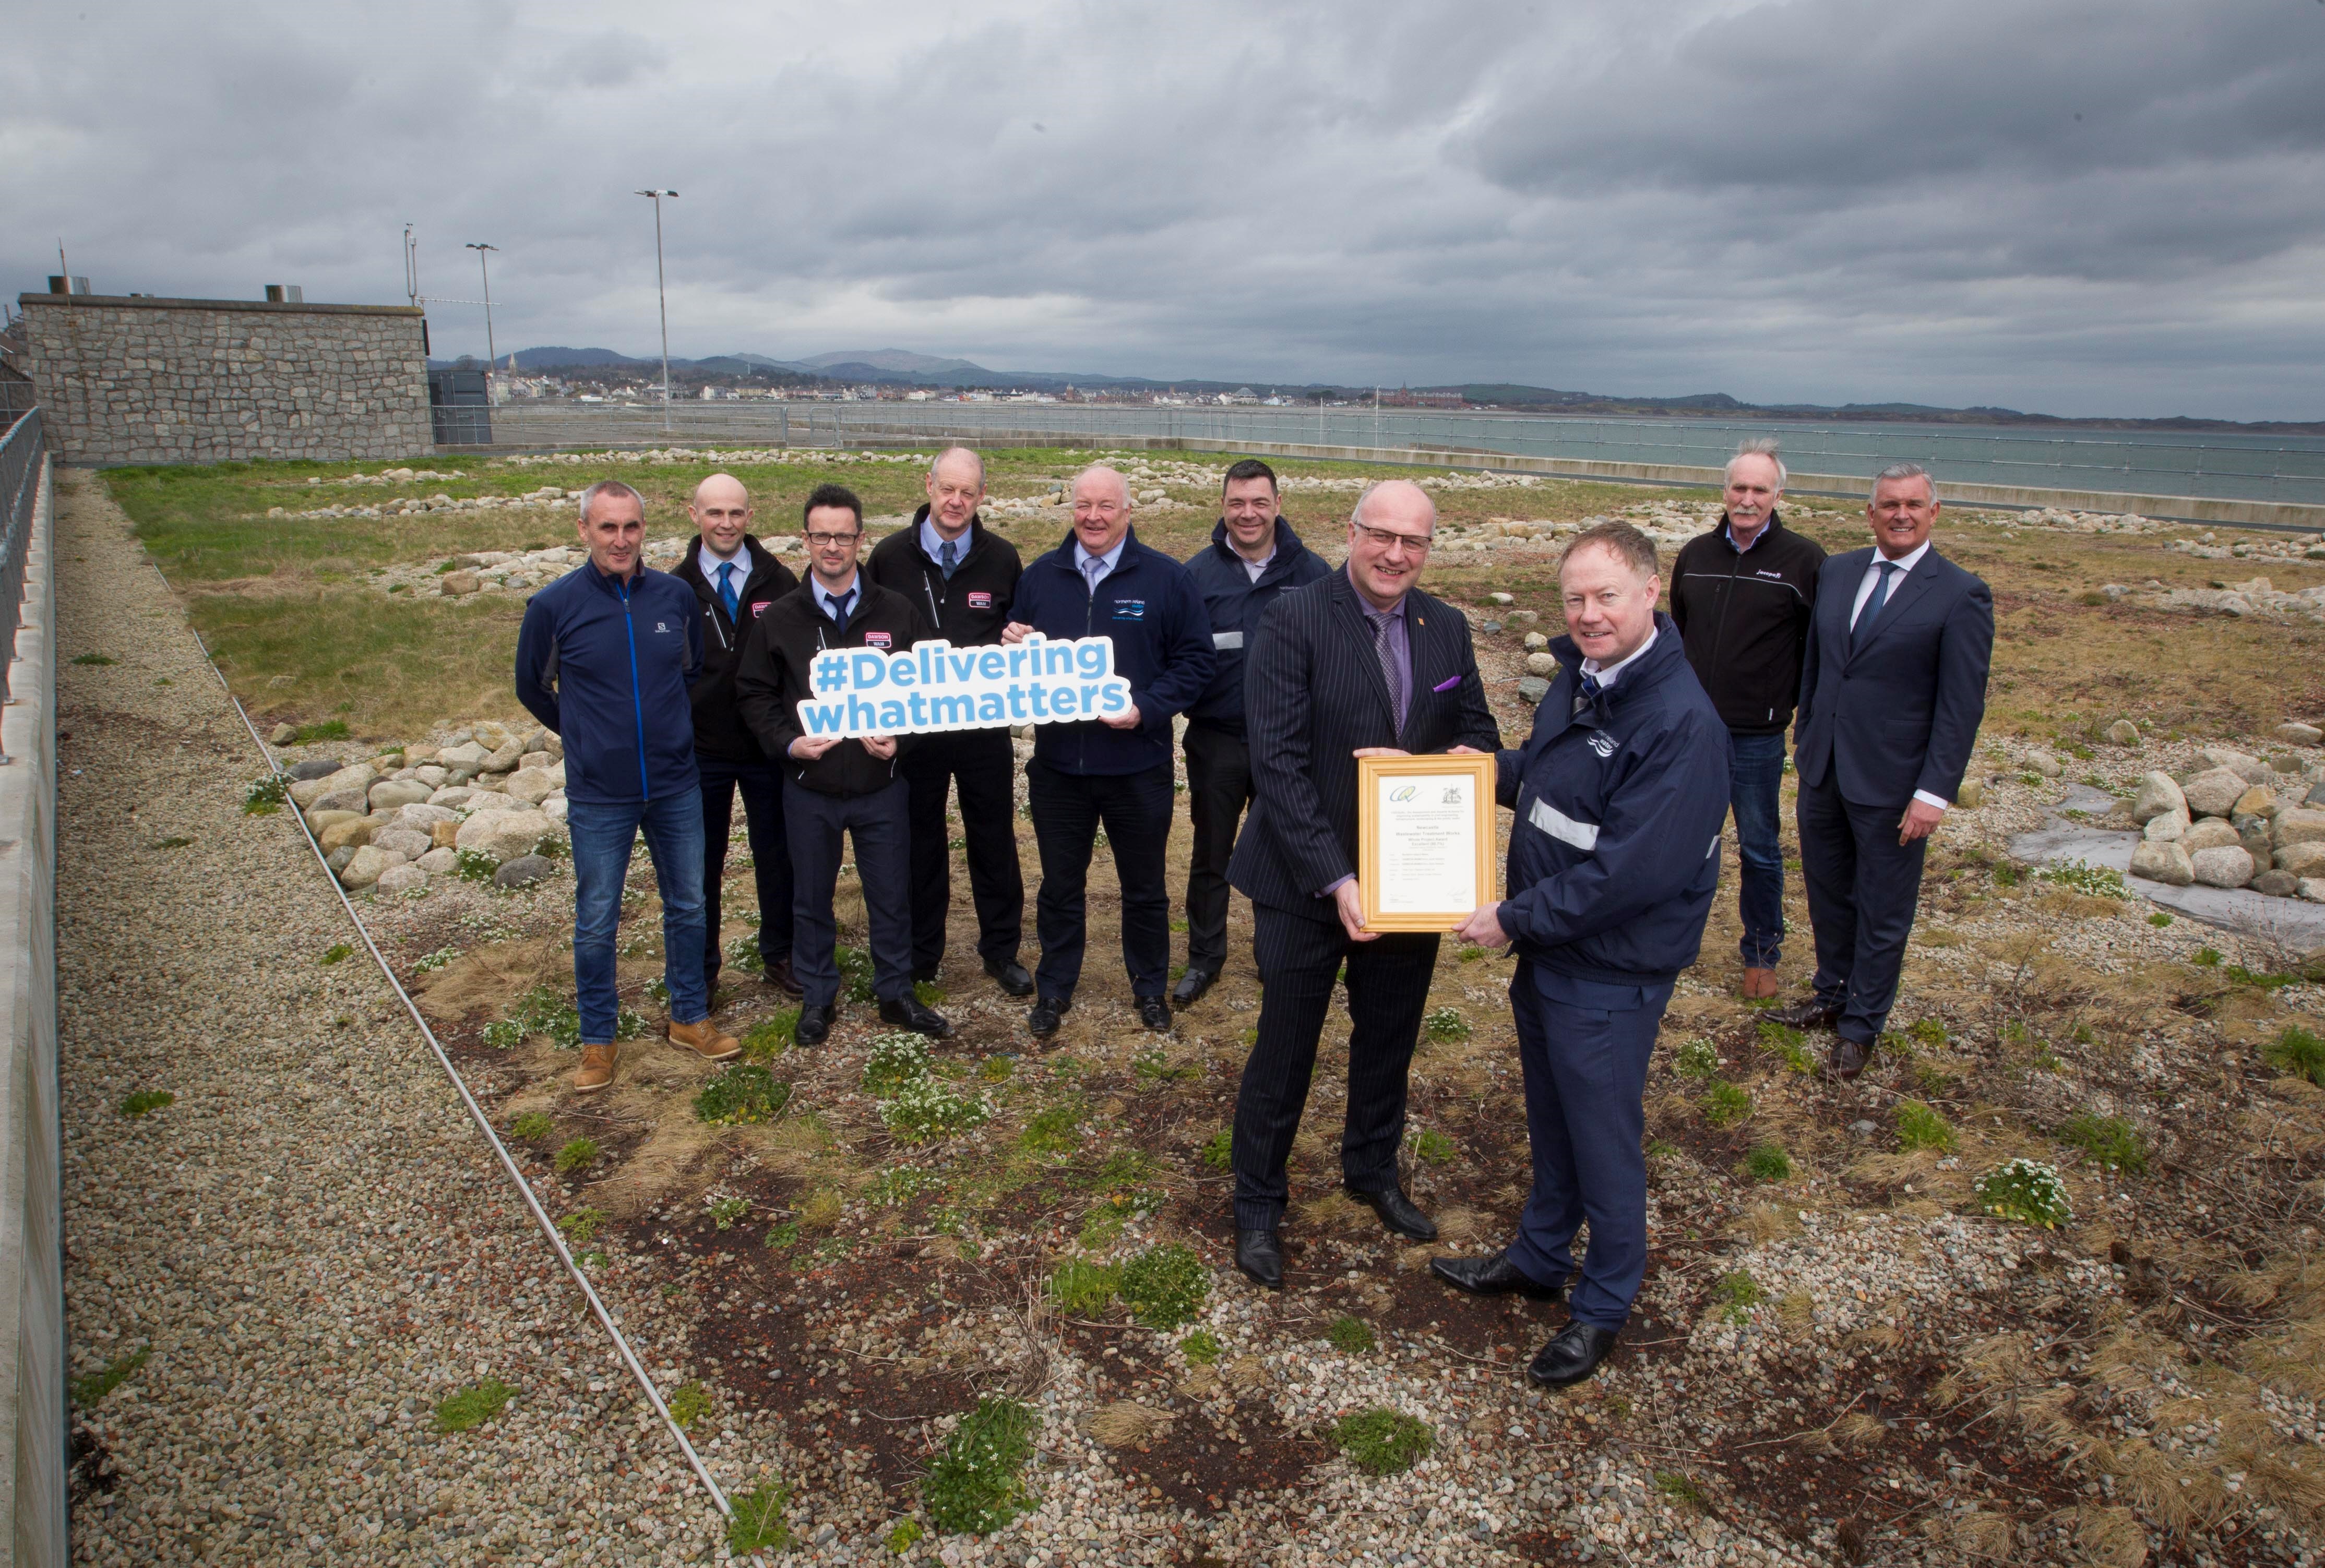 Kieran Grant from NI Water accepts the ‘excellent’ award from Ian Nicholson of CEEQUAL on behalf of the project team comprising NI Water, Dawson Wam Ovivo JV and McAdam Design for the £10m Newcastle WwTW upgrade.  | NI Water News